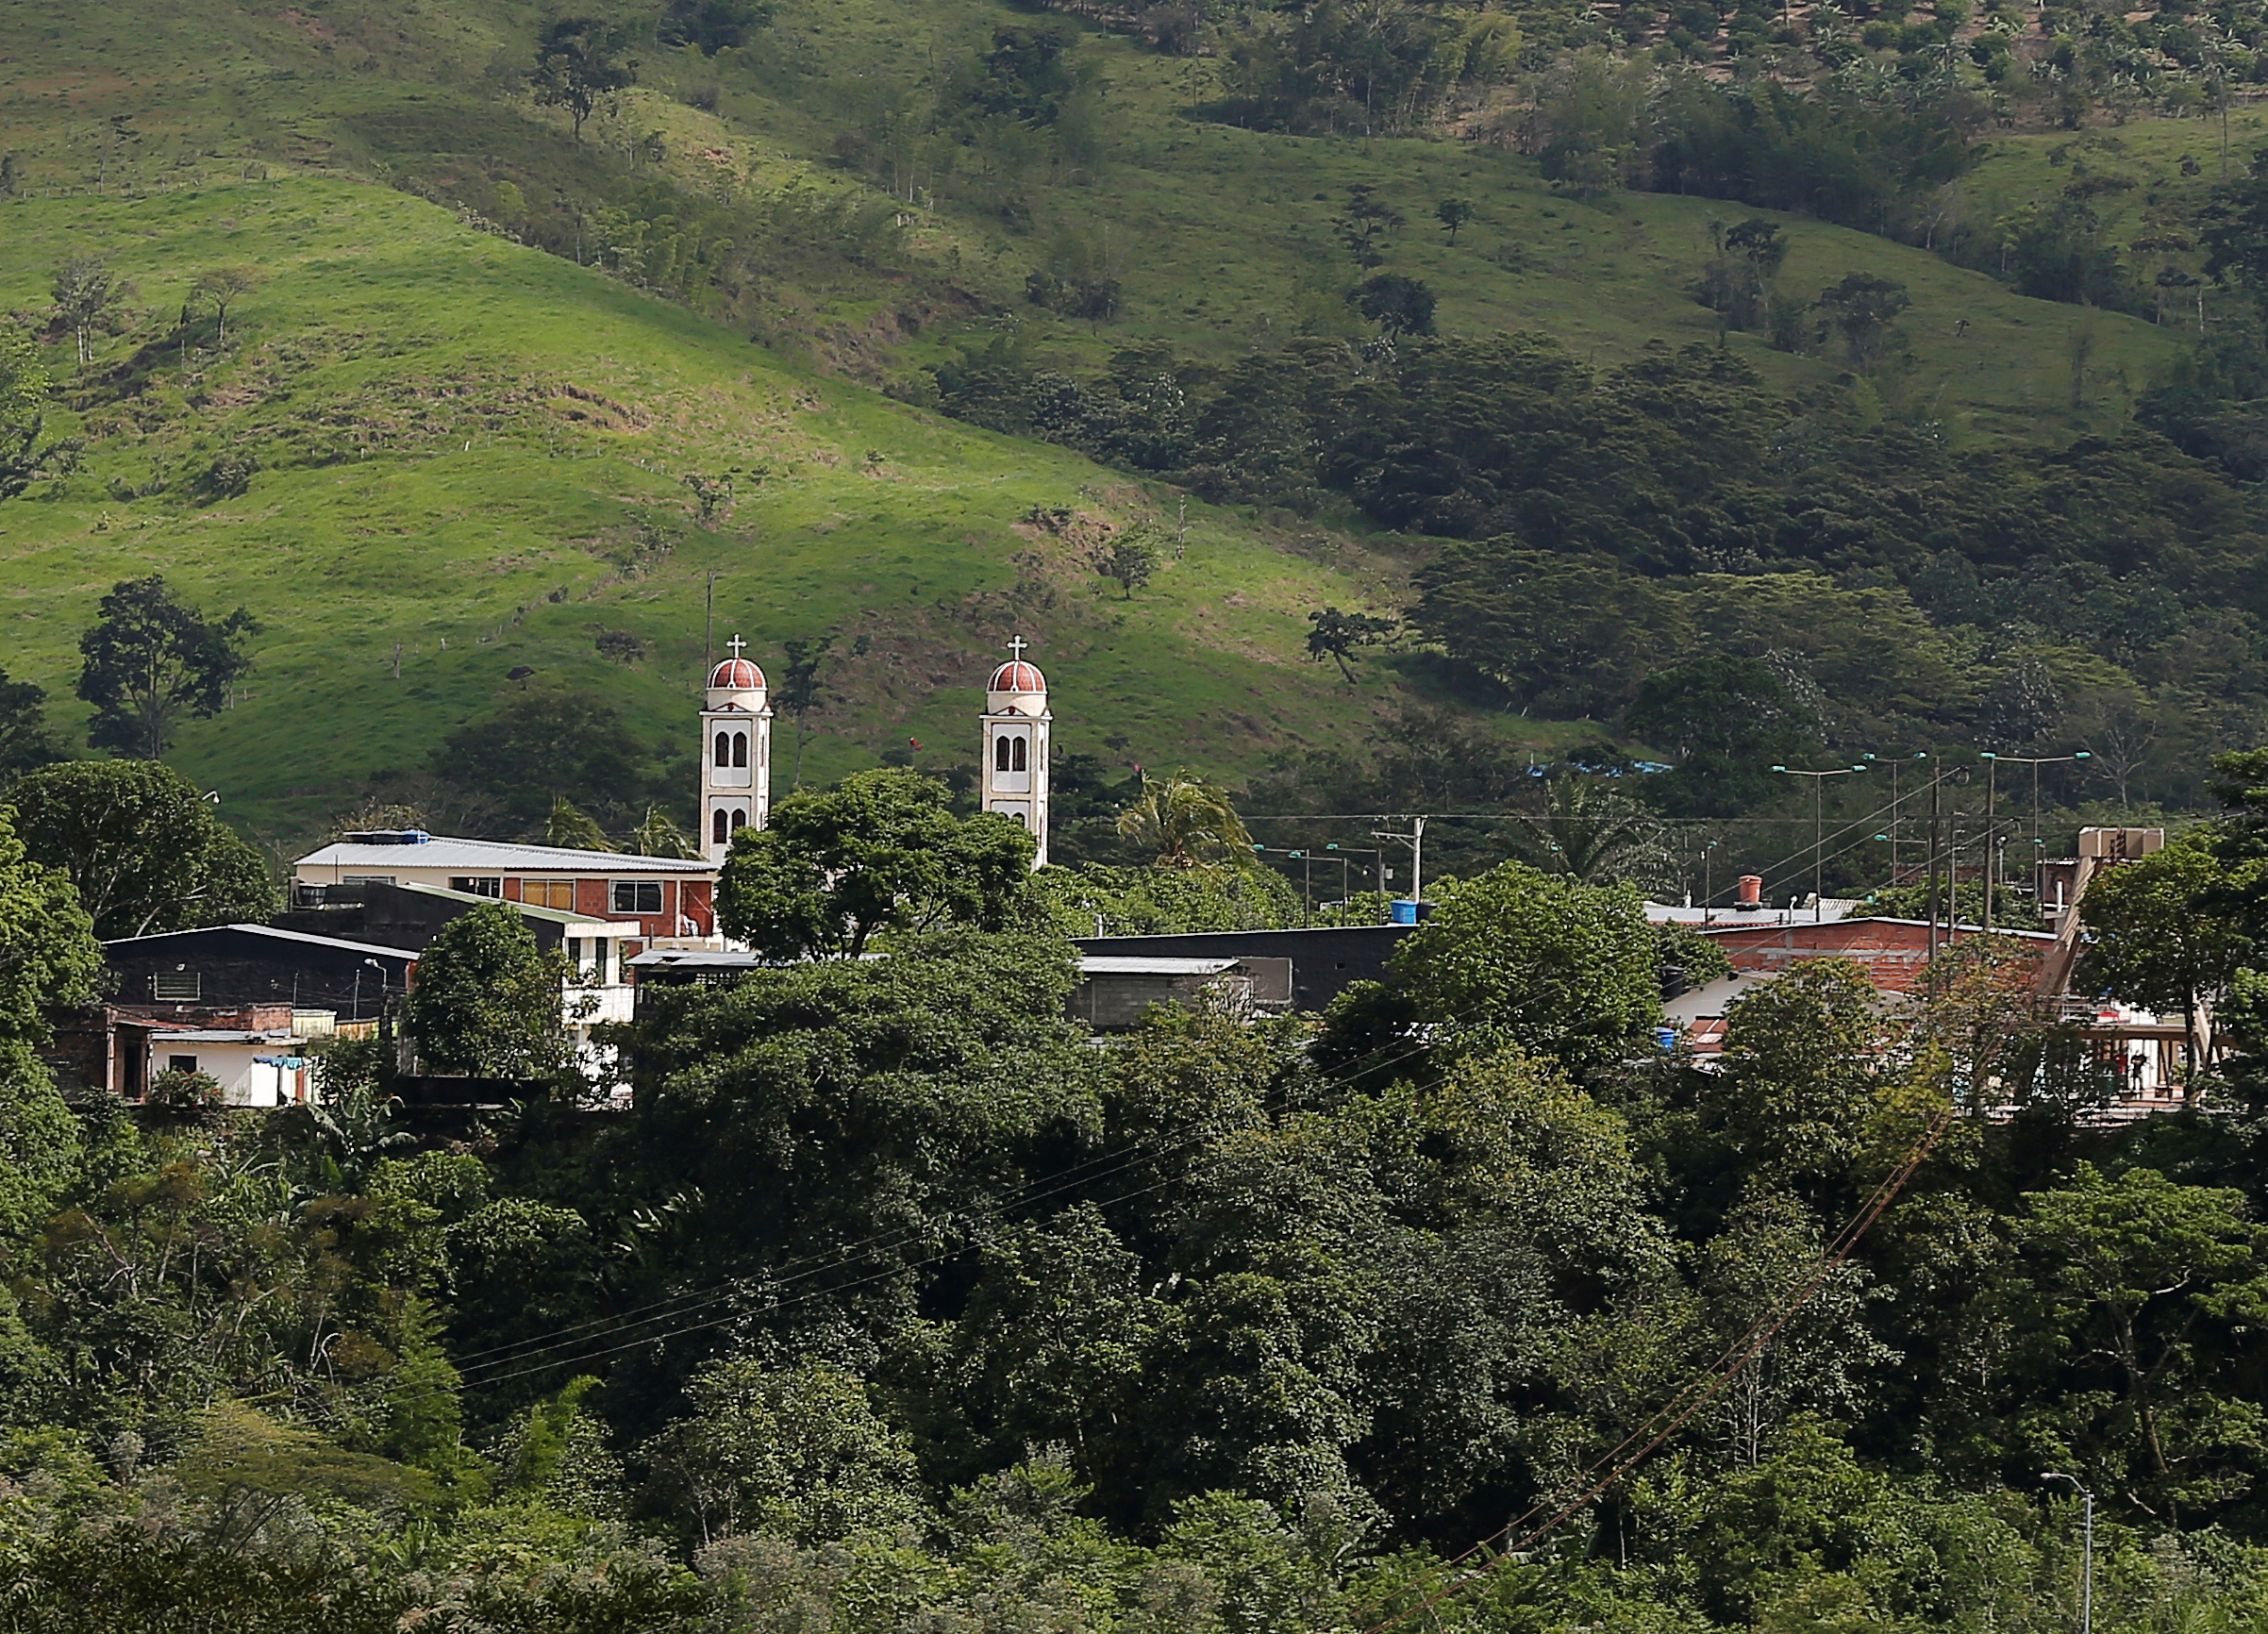 A general view of  Lejanias, Meta province, Colombia